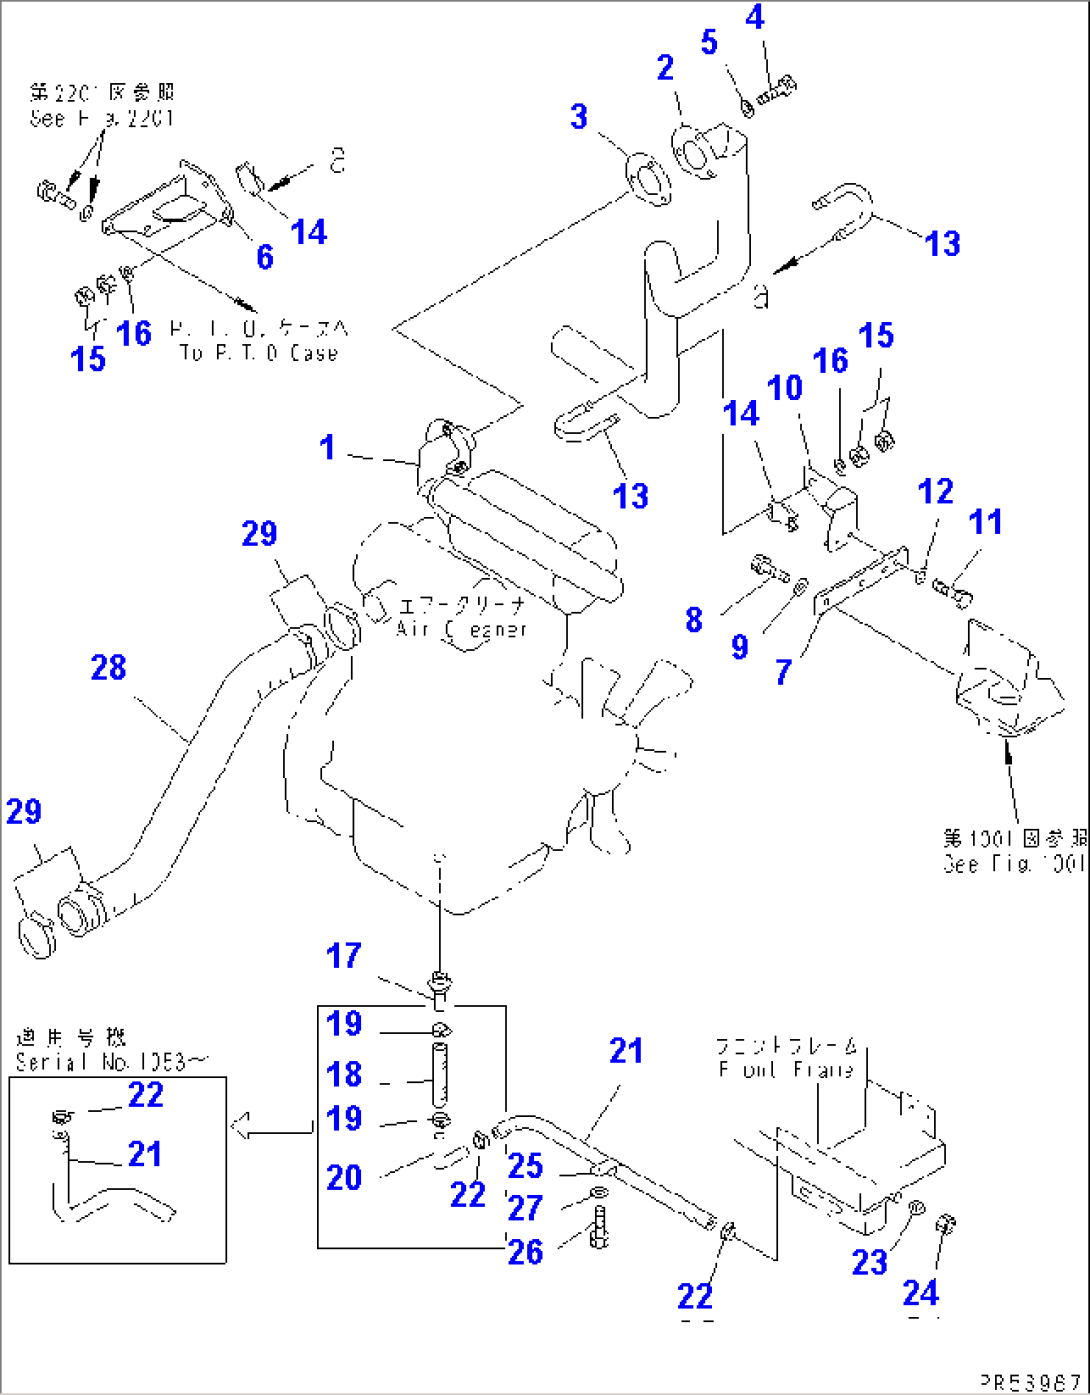 ENGINE RELATED PARTS(#1027-1100)